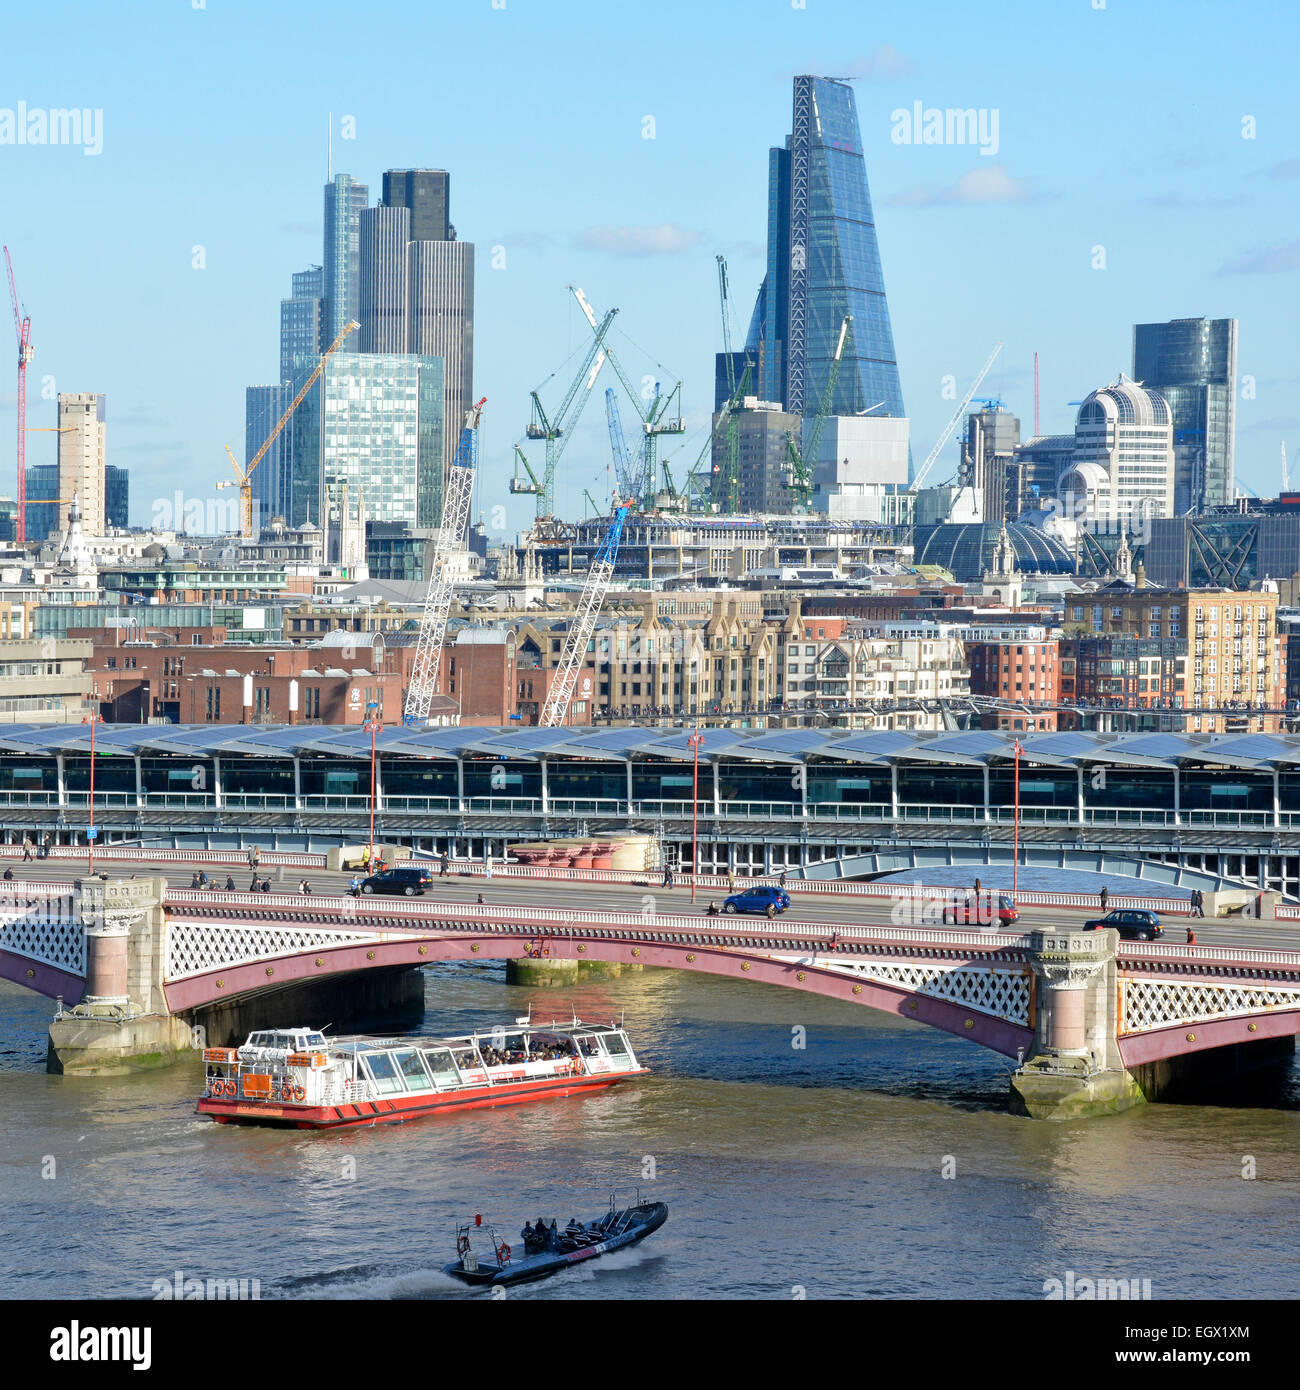 Blackfriars road Bridge & the solar panel roof of the remodelled Blackfriars train station above the river Thames & City of London skyline beyond UK Stock Photo